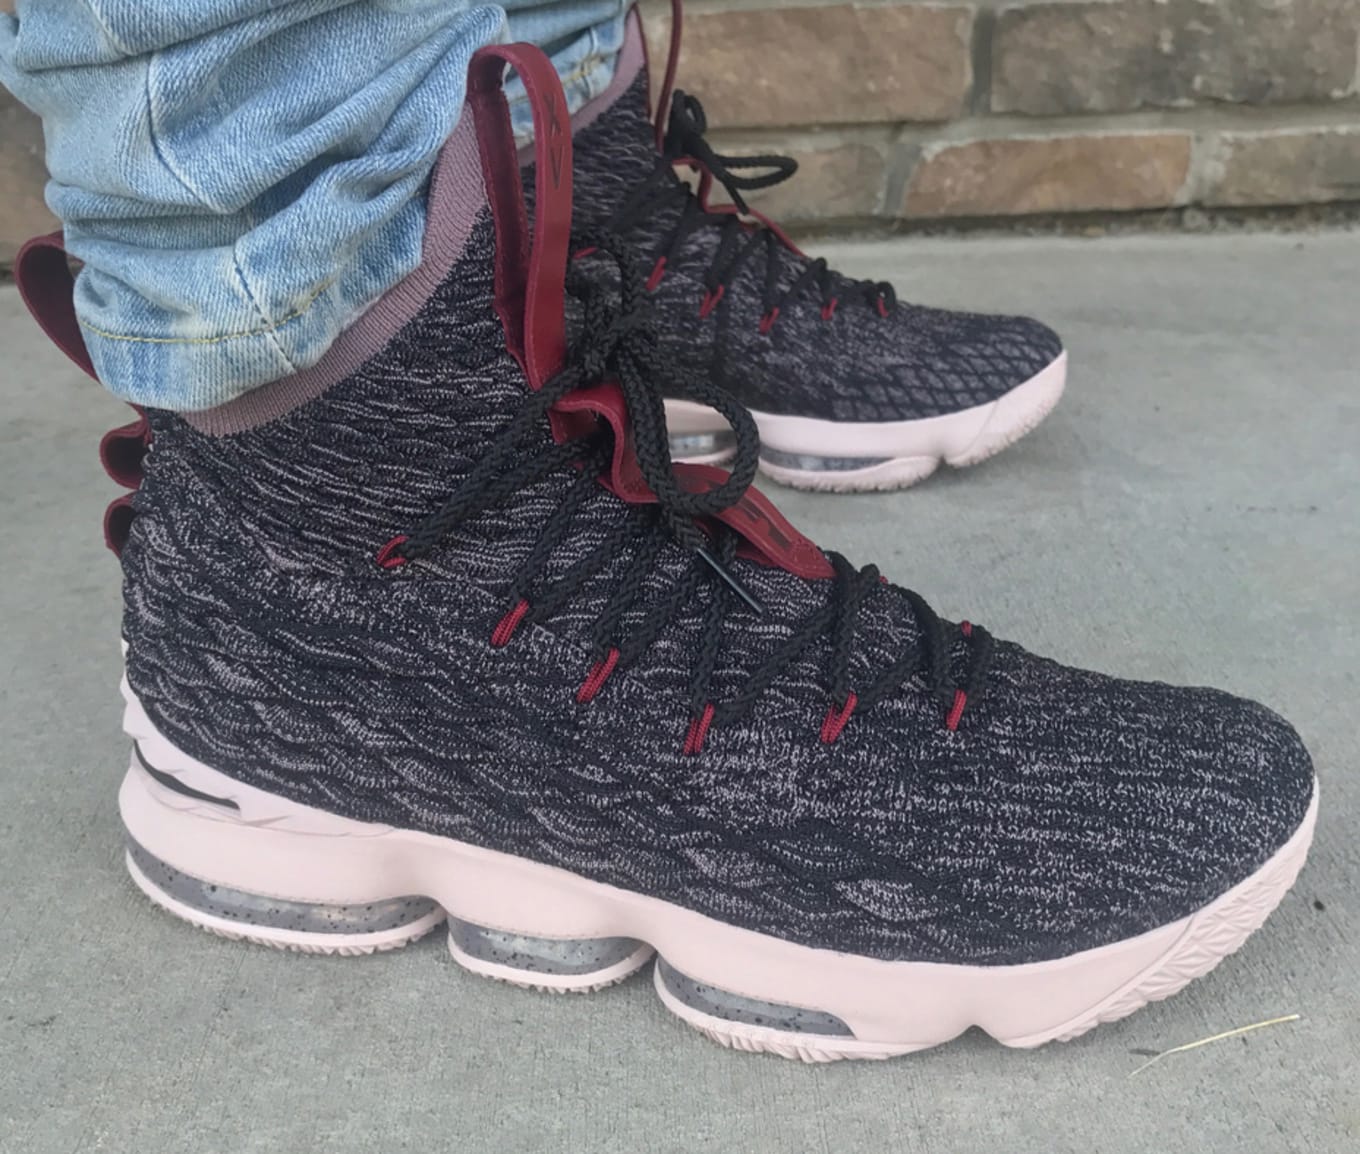 lebron 15 low ashes on feet